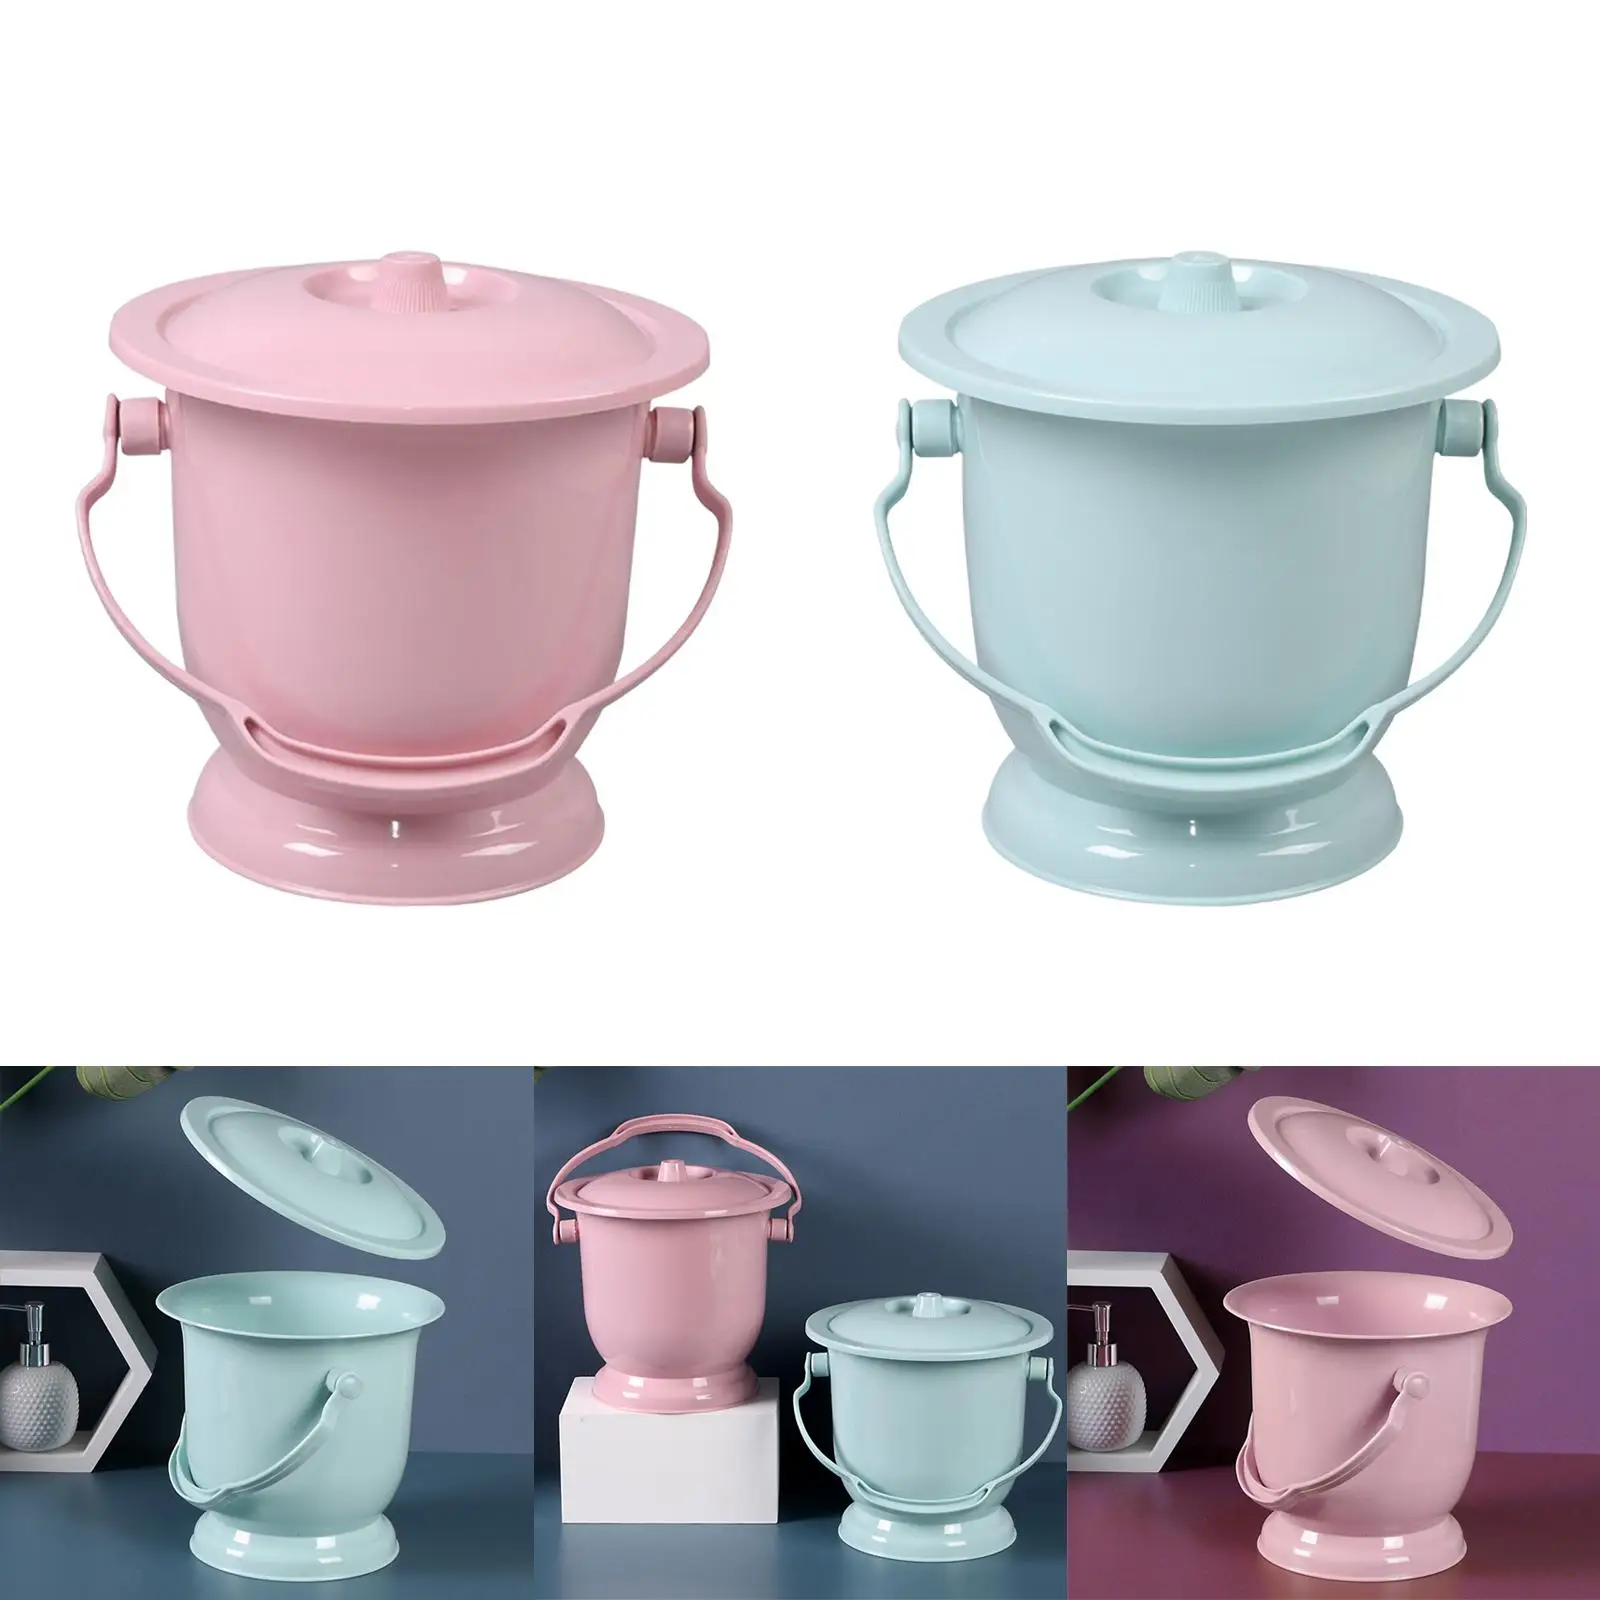 Handheld Spittoon with Lid  Generic Practical Urinal Bottle Night Pot Chamber Pot for Household Child Elder Bedroom Home Use